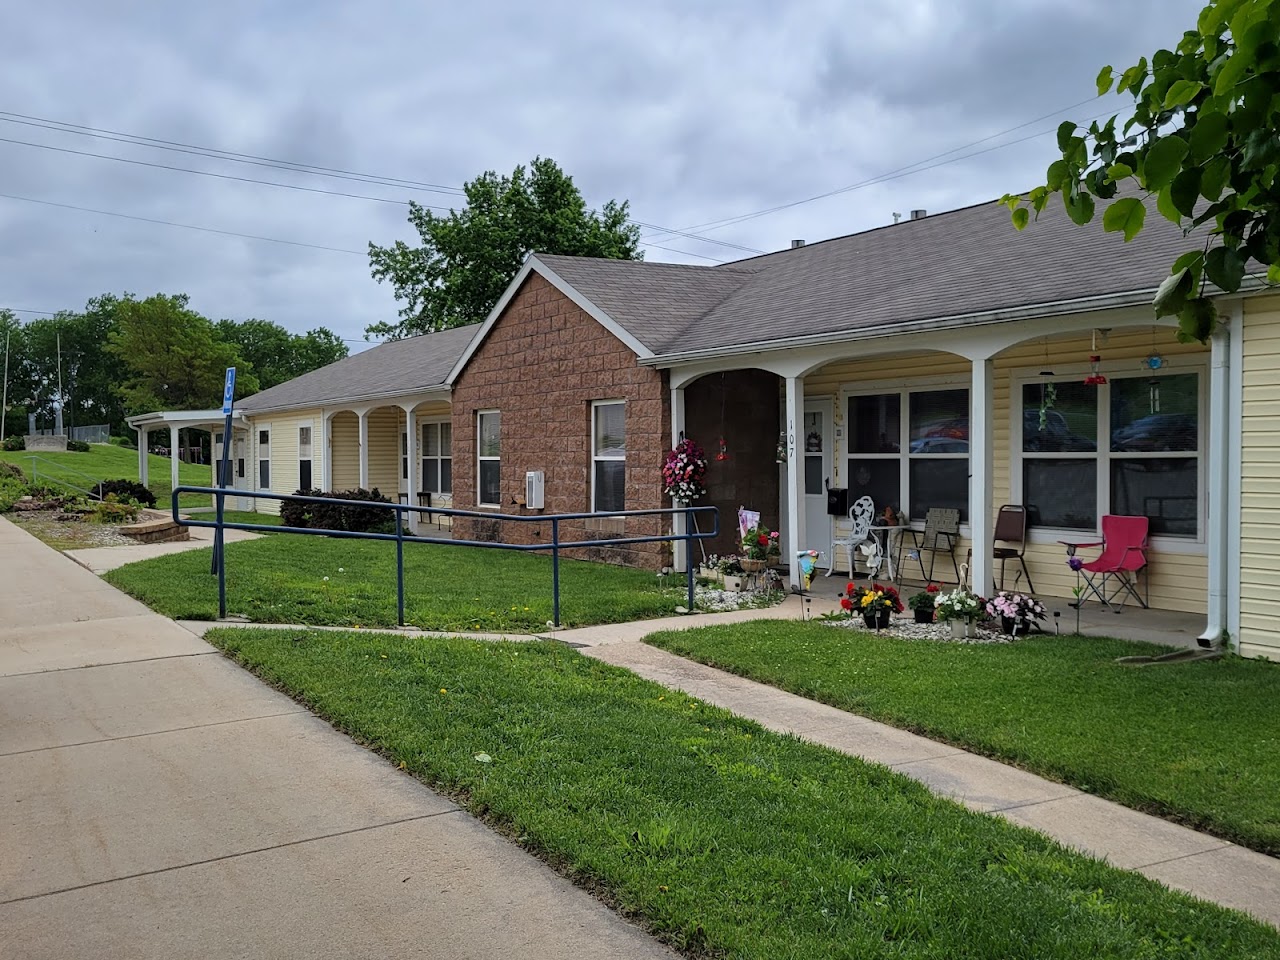 Photo of PONY RUN. Affordable housing located at 211 S 17TH ST MARYSVILLE, KS 66508